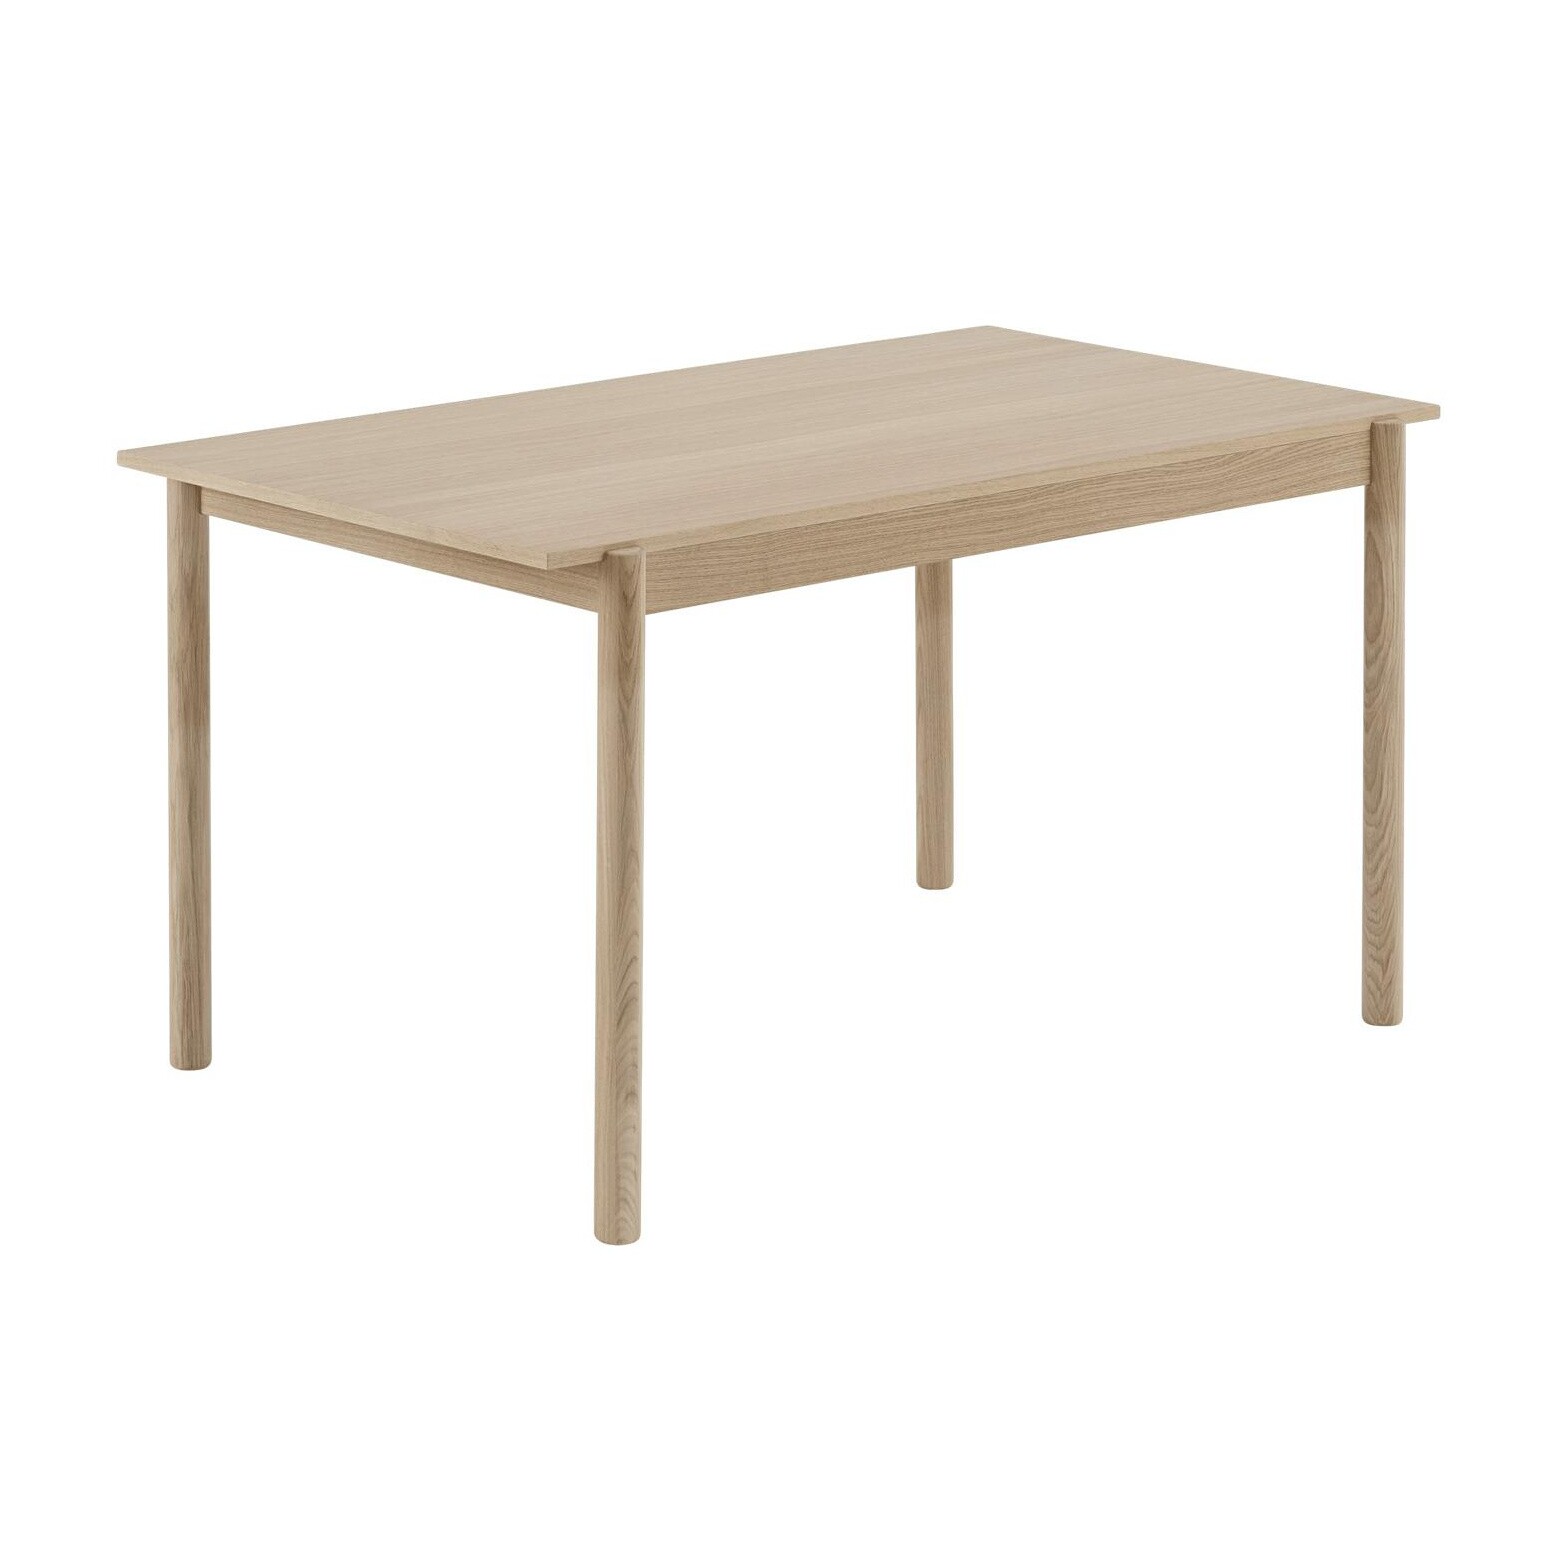 Muuto Linear Wood Dining Table 140x85cm Ambientedirect